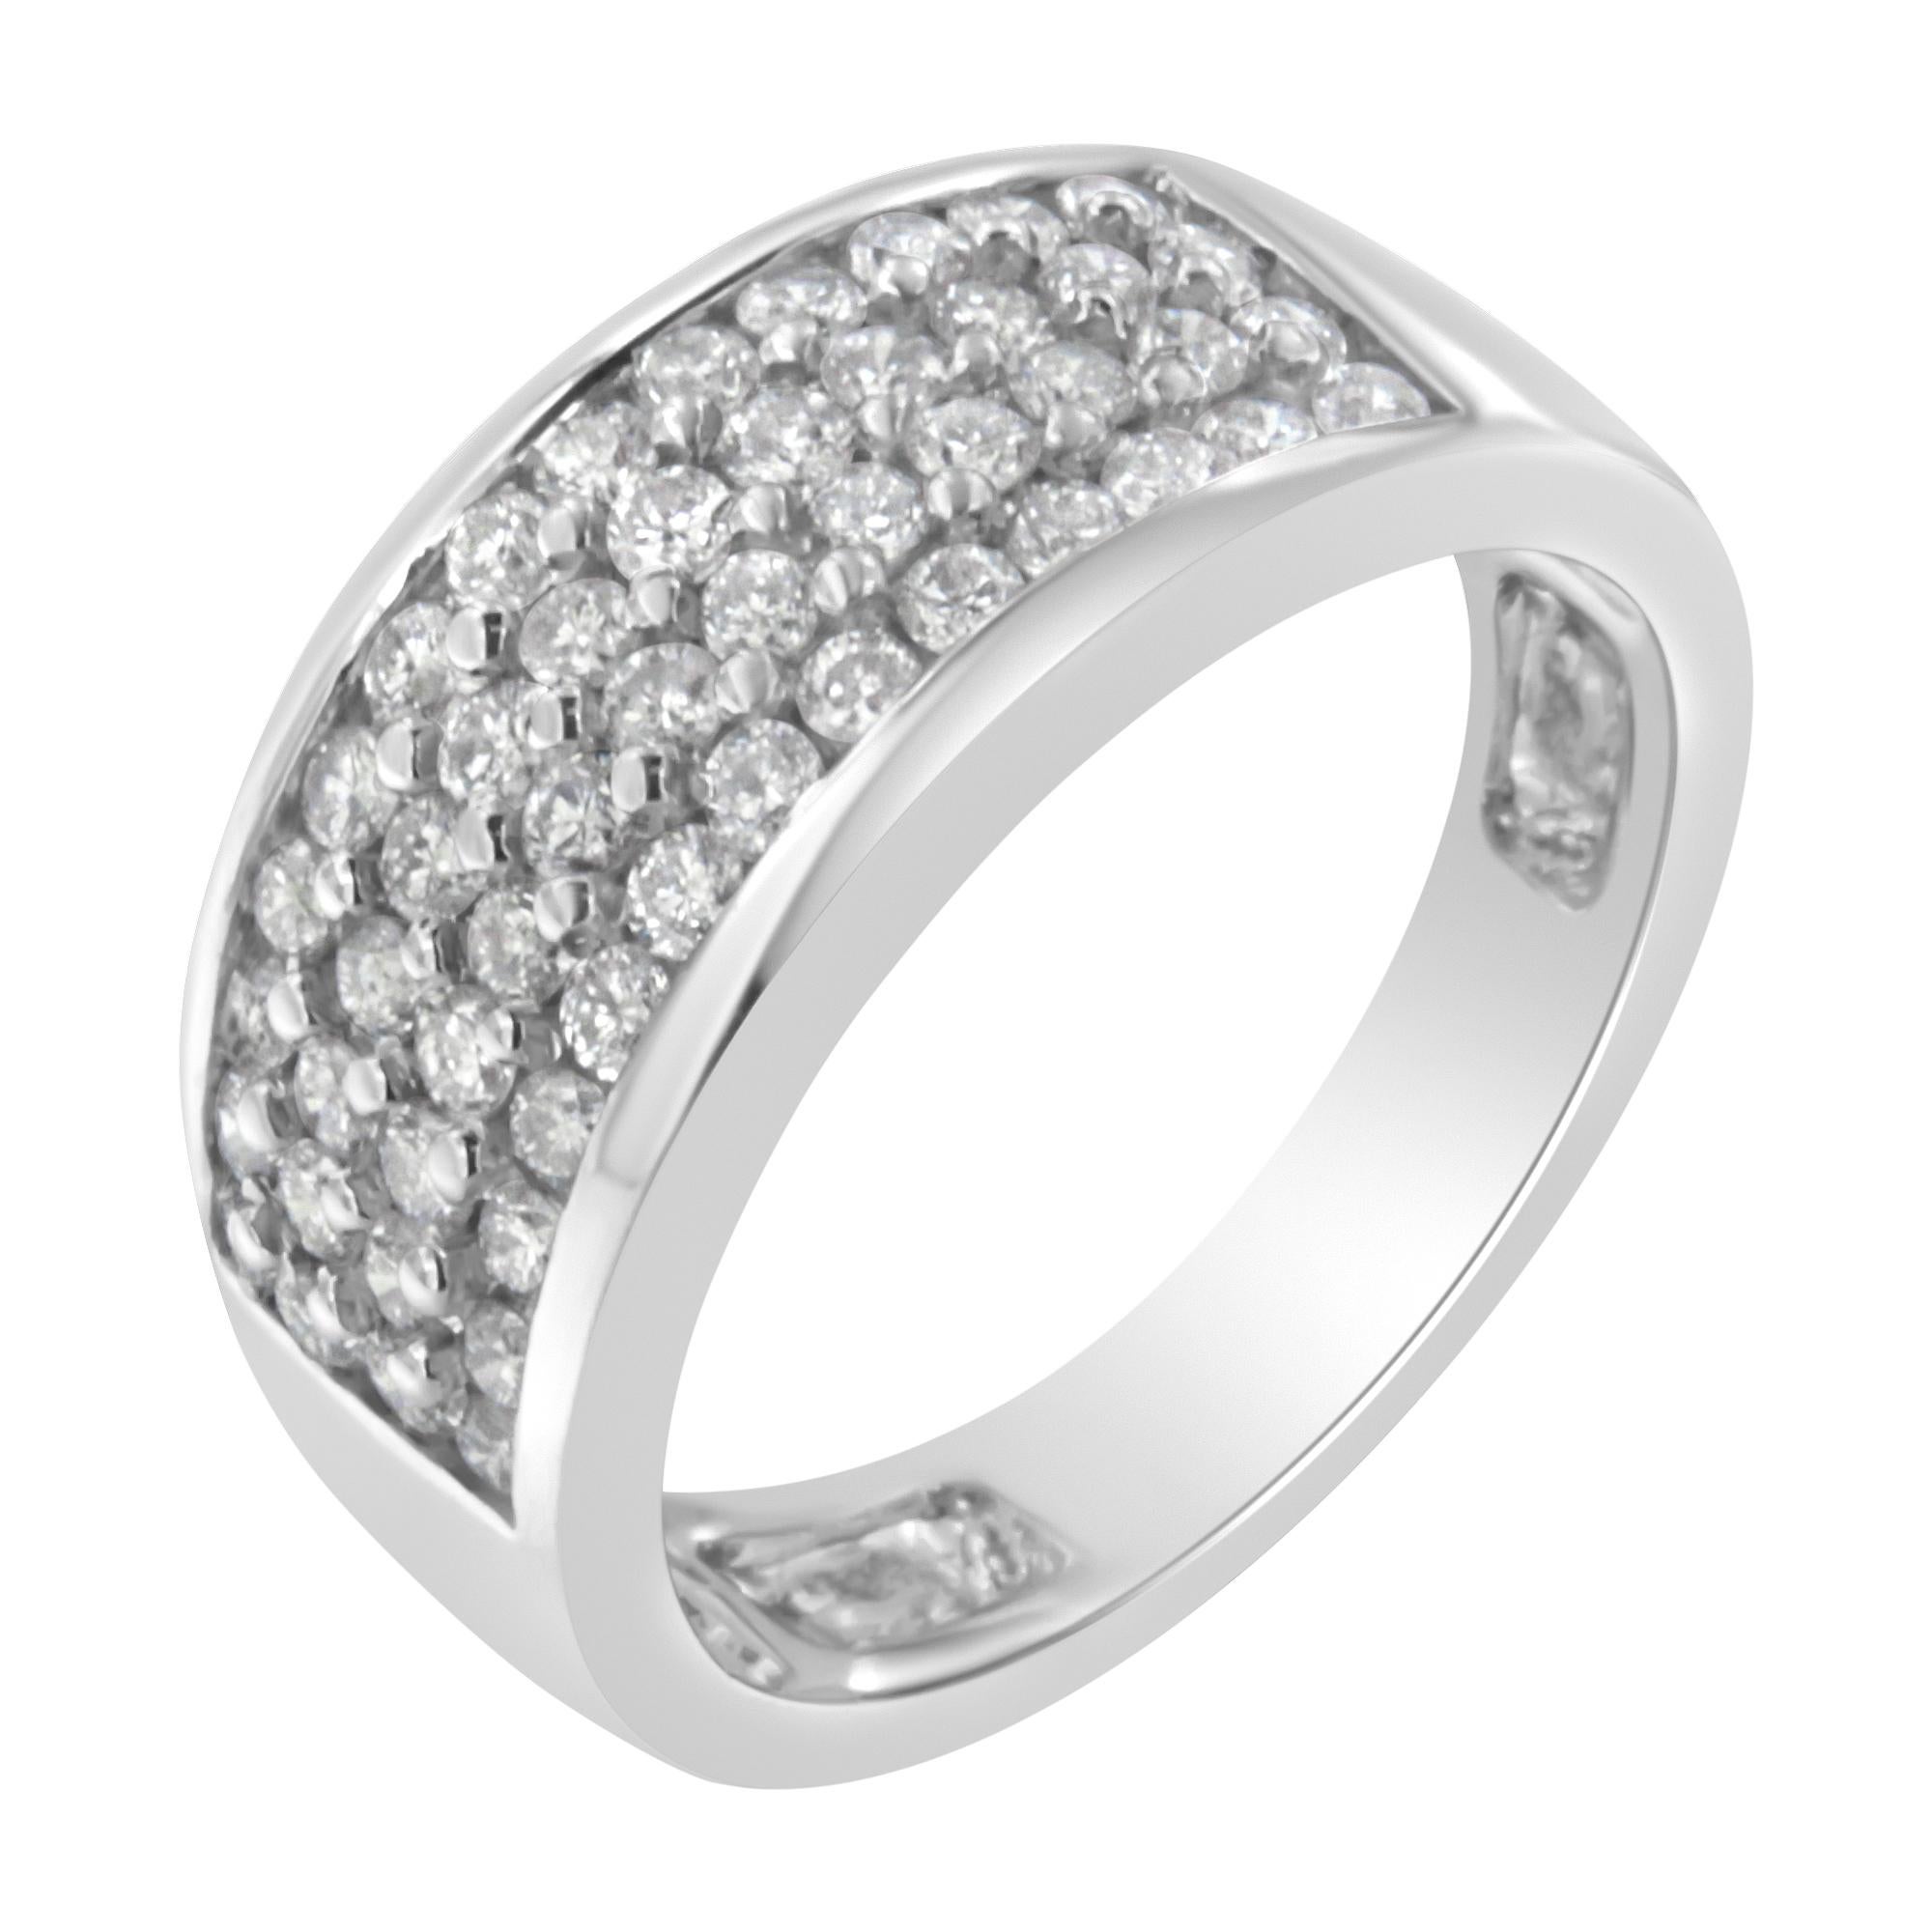 For Sale:  14K White Gold 1.00 Carat Diamond Cocktail Band Ring 2